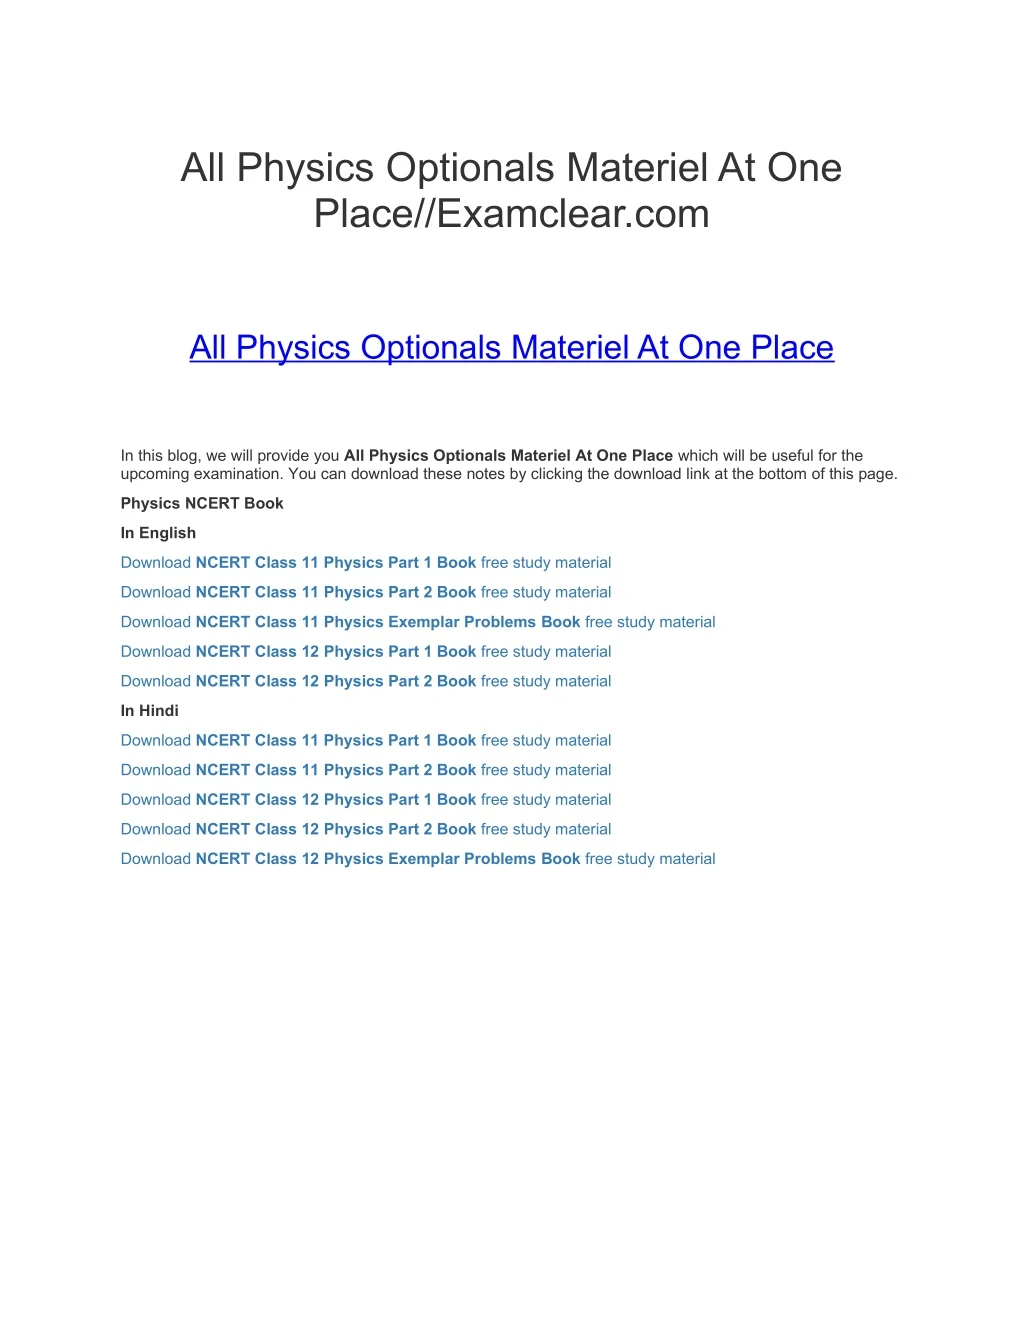 all physics optionals materiel at one place